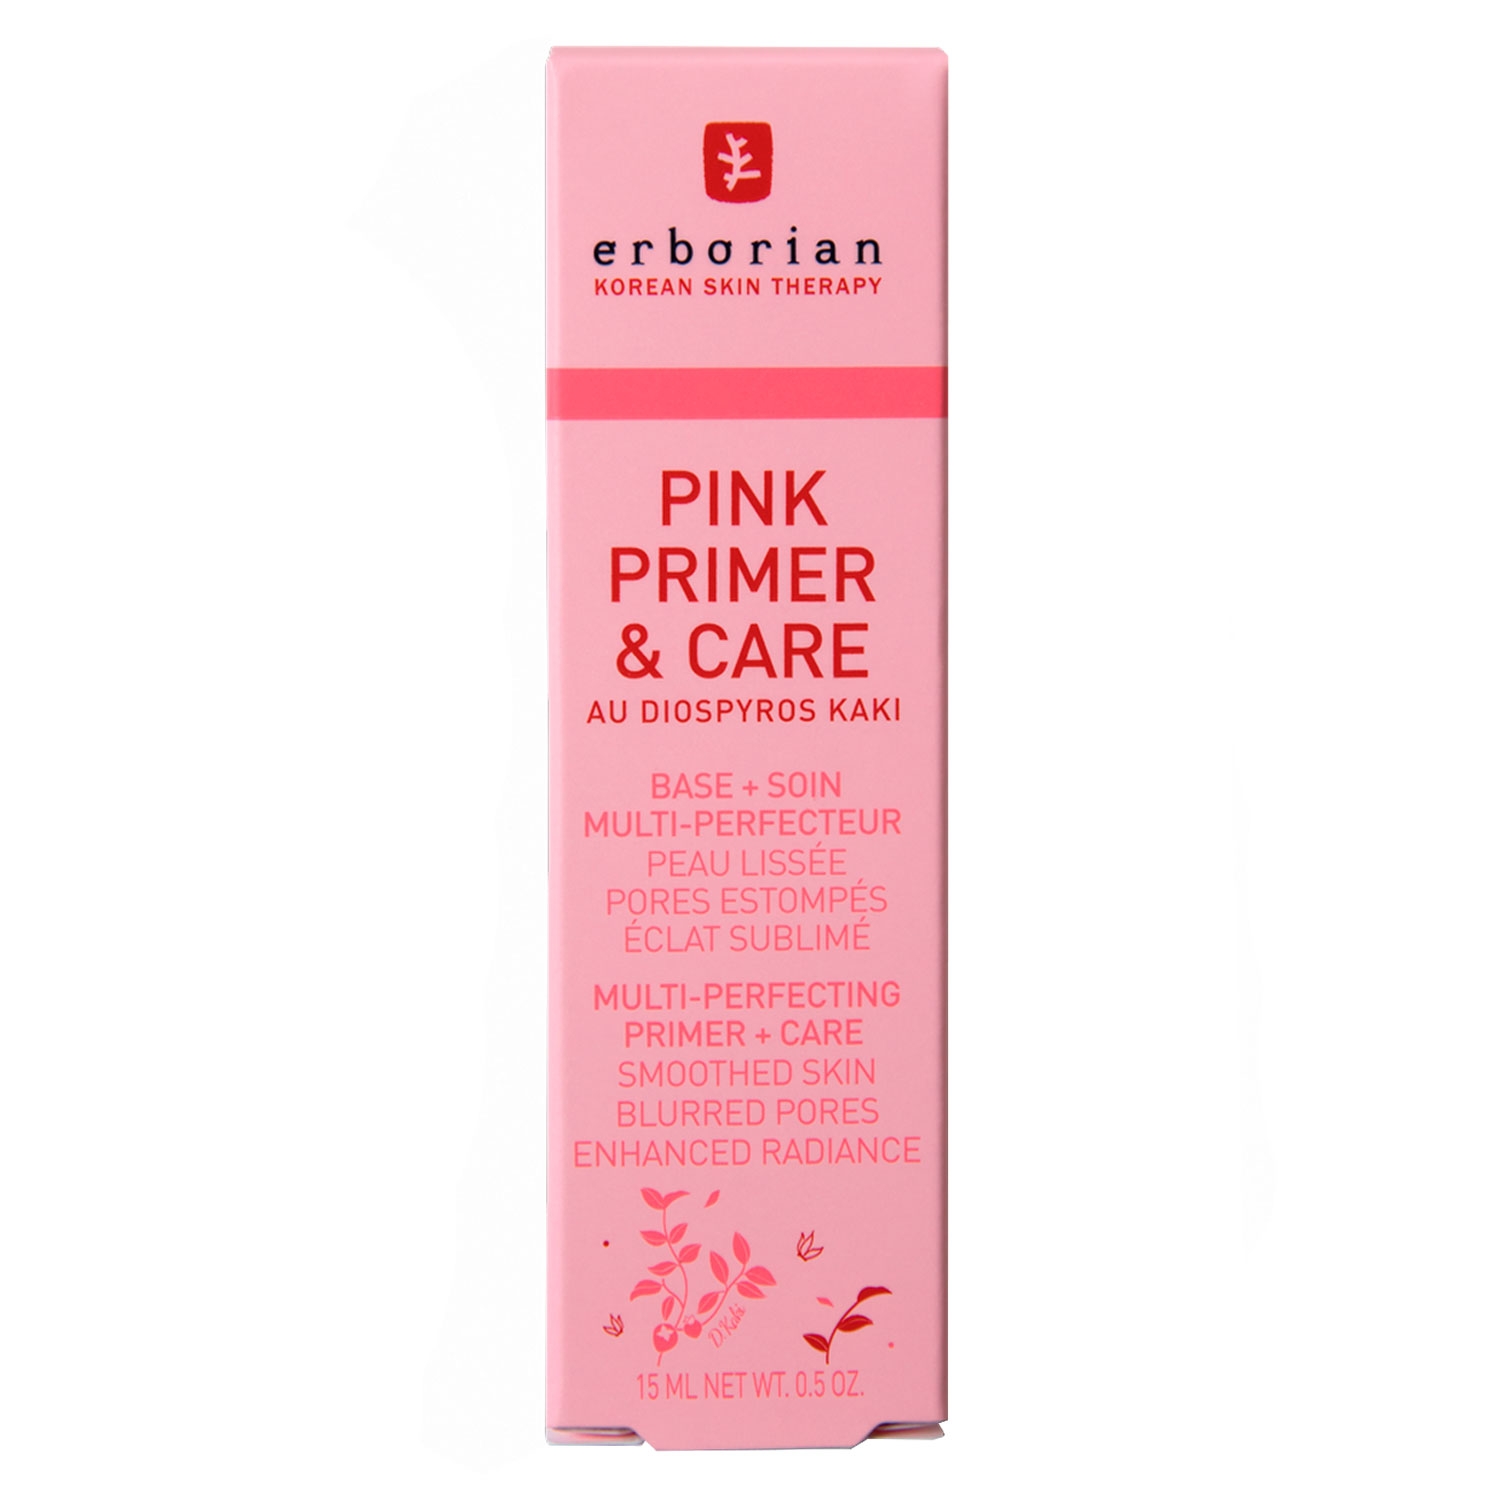 Product image from erborian Primers - Pink Primer & Care